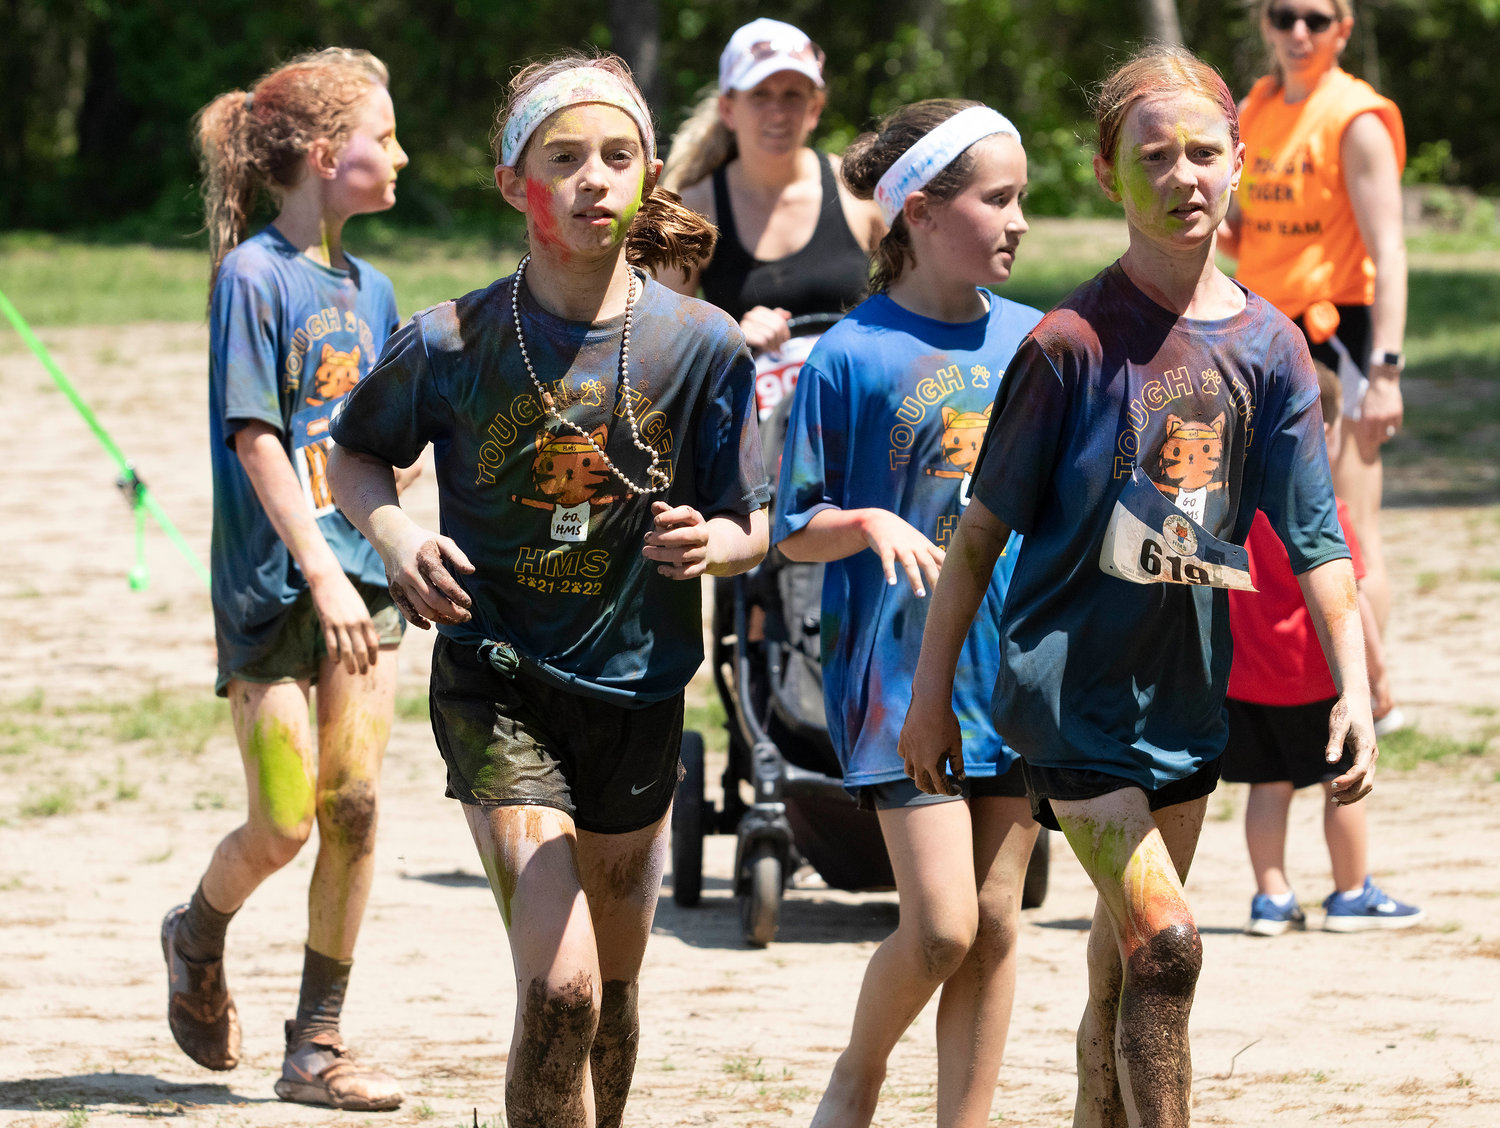 A group of Hampden Meadows School students participate in the Tough Tiger adventure race, held last Sunday.